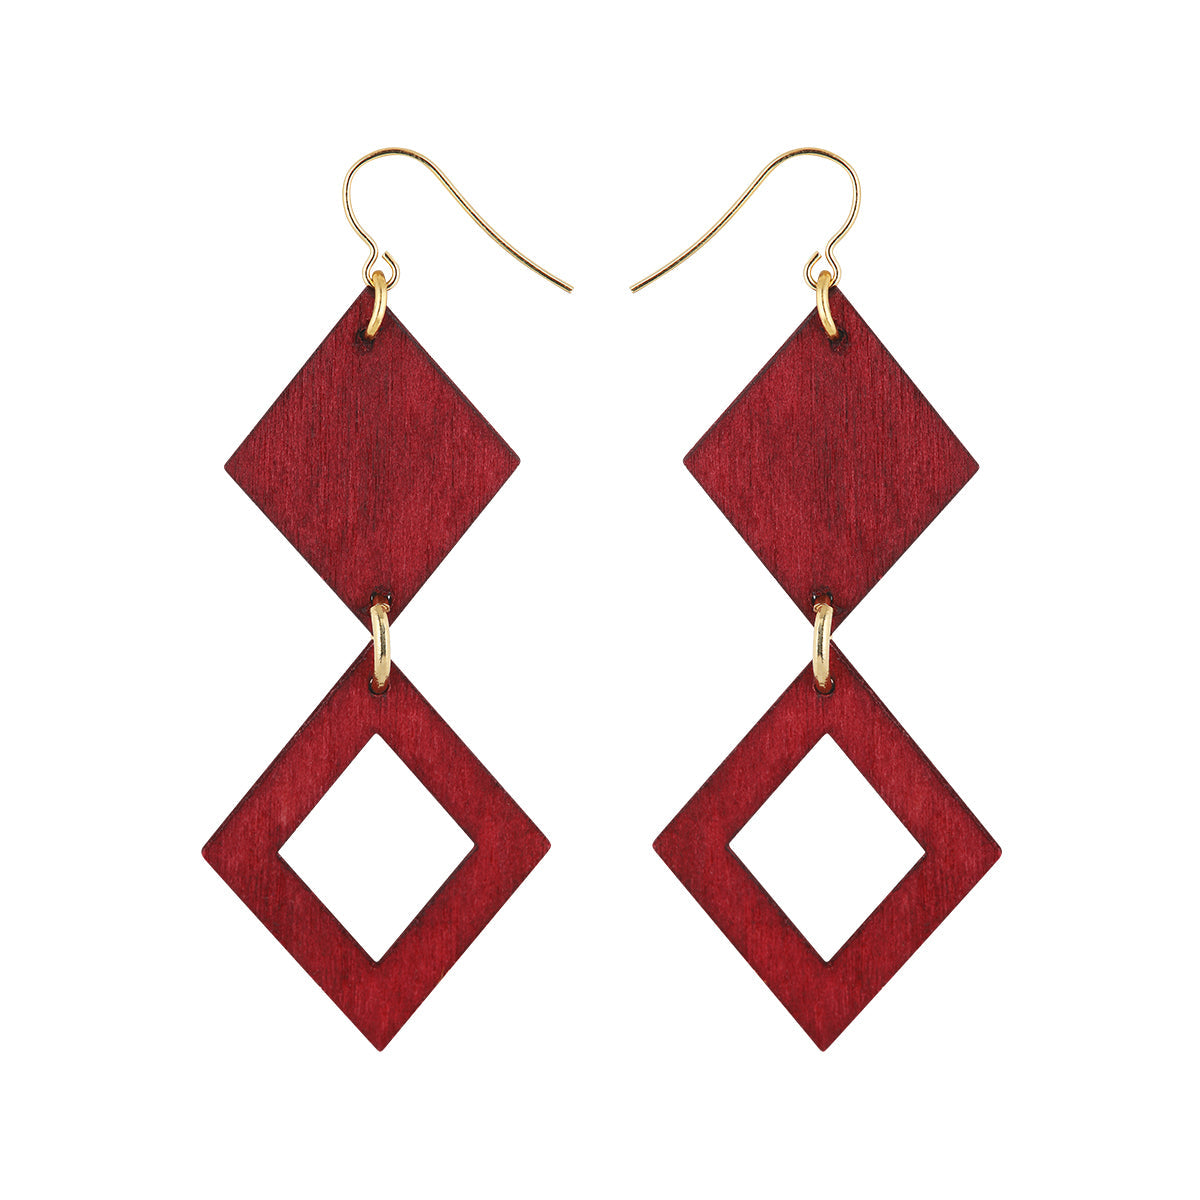 Triangeli earrings, red and gold